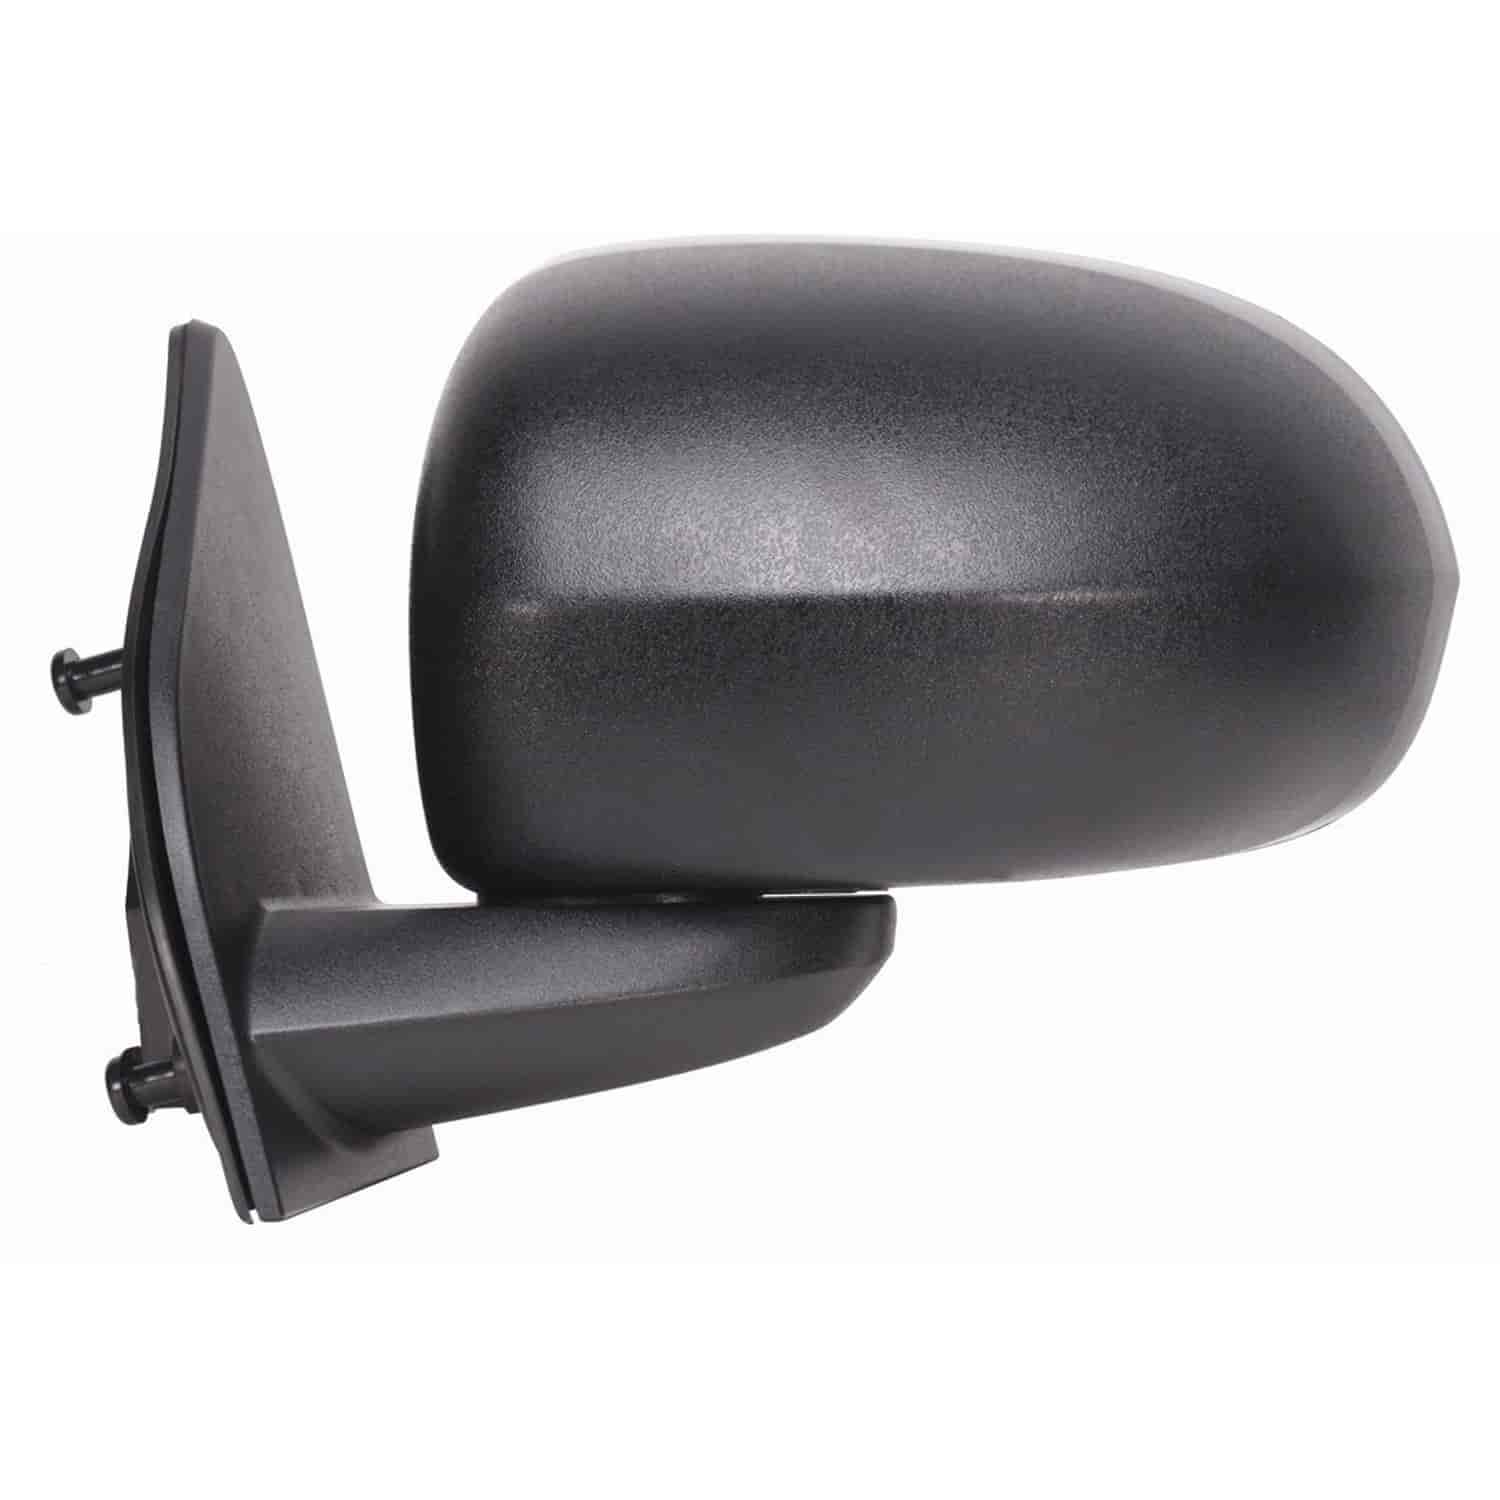 OEM Style Replacement mirror for 07-14 JEEP Compass driver side mirror tested to fit and function li